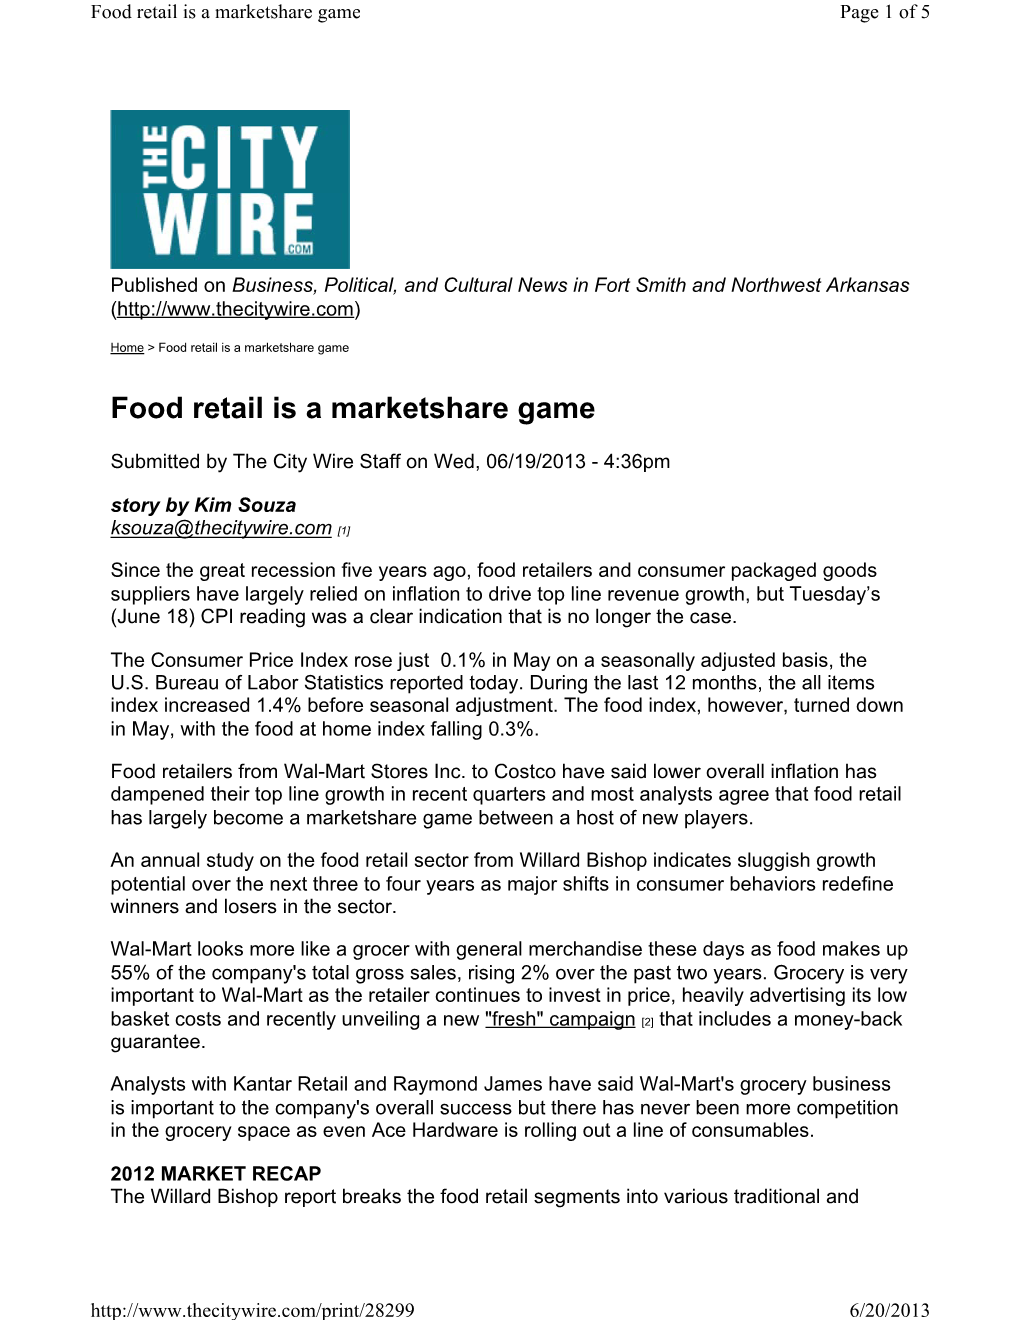 Food Retail Is a Marketshare Game Page 1 of 5